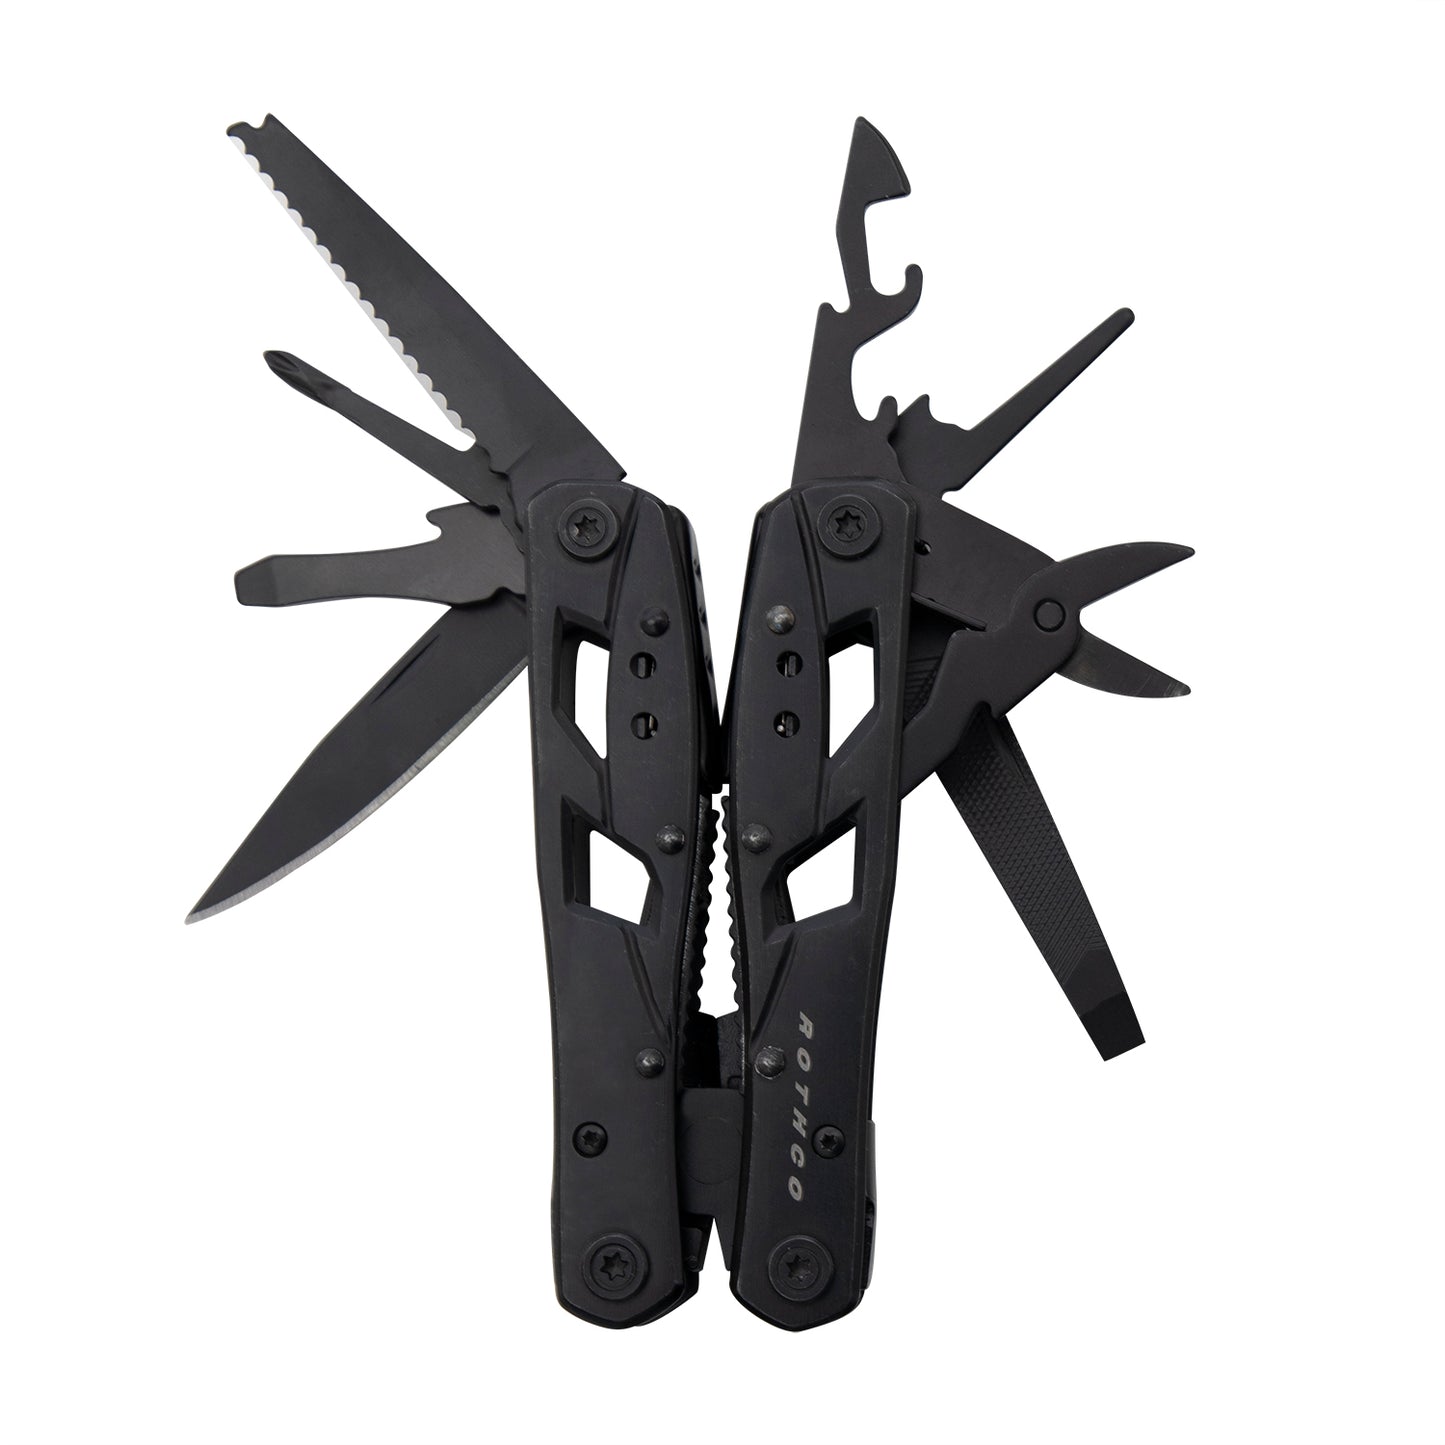 For the avid outdoorsman and tactical enthusiast, this Multi-Tool contains over ten different versatile tools; perfect for your Bug Out Bag.  